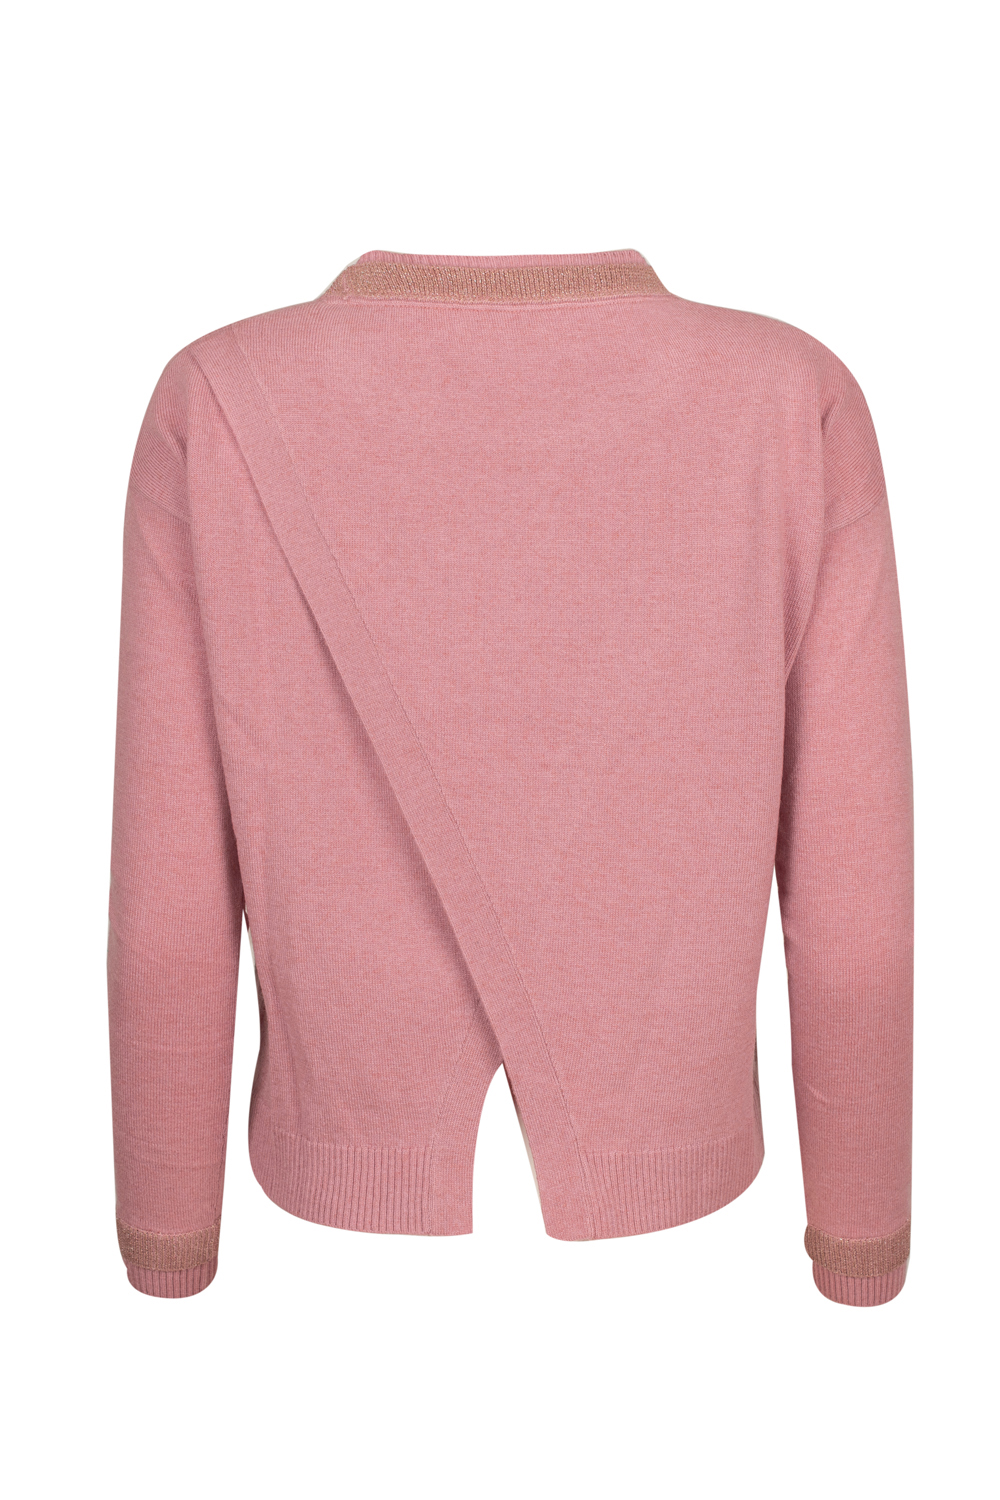 Pink Sweater with Lurex Neck and Sleeve Detail and Slit Back